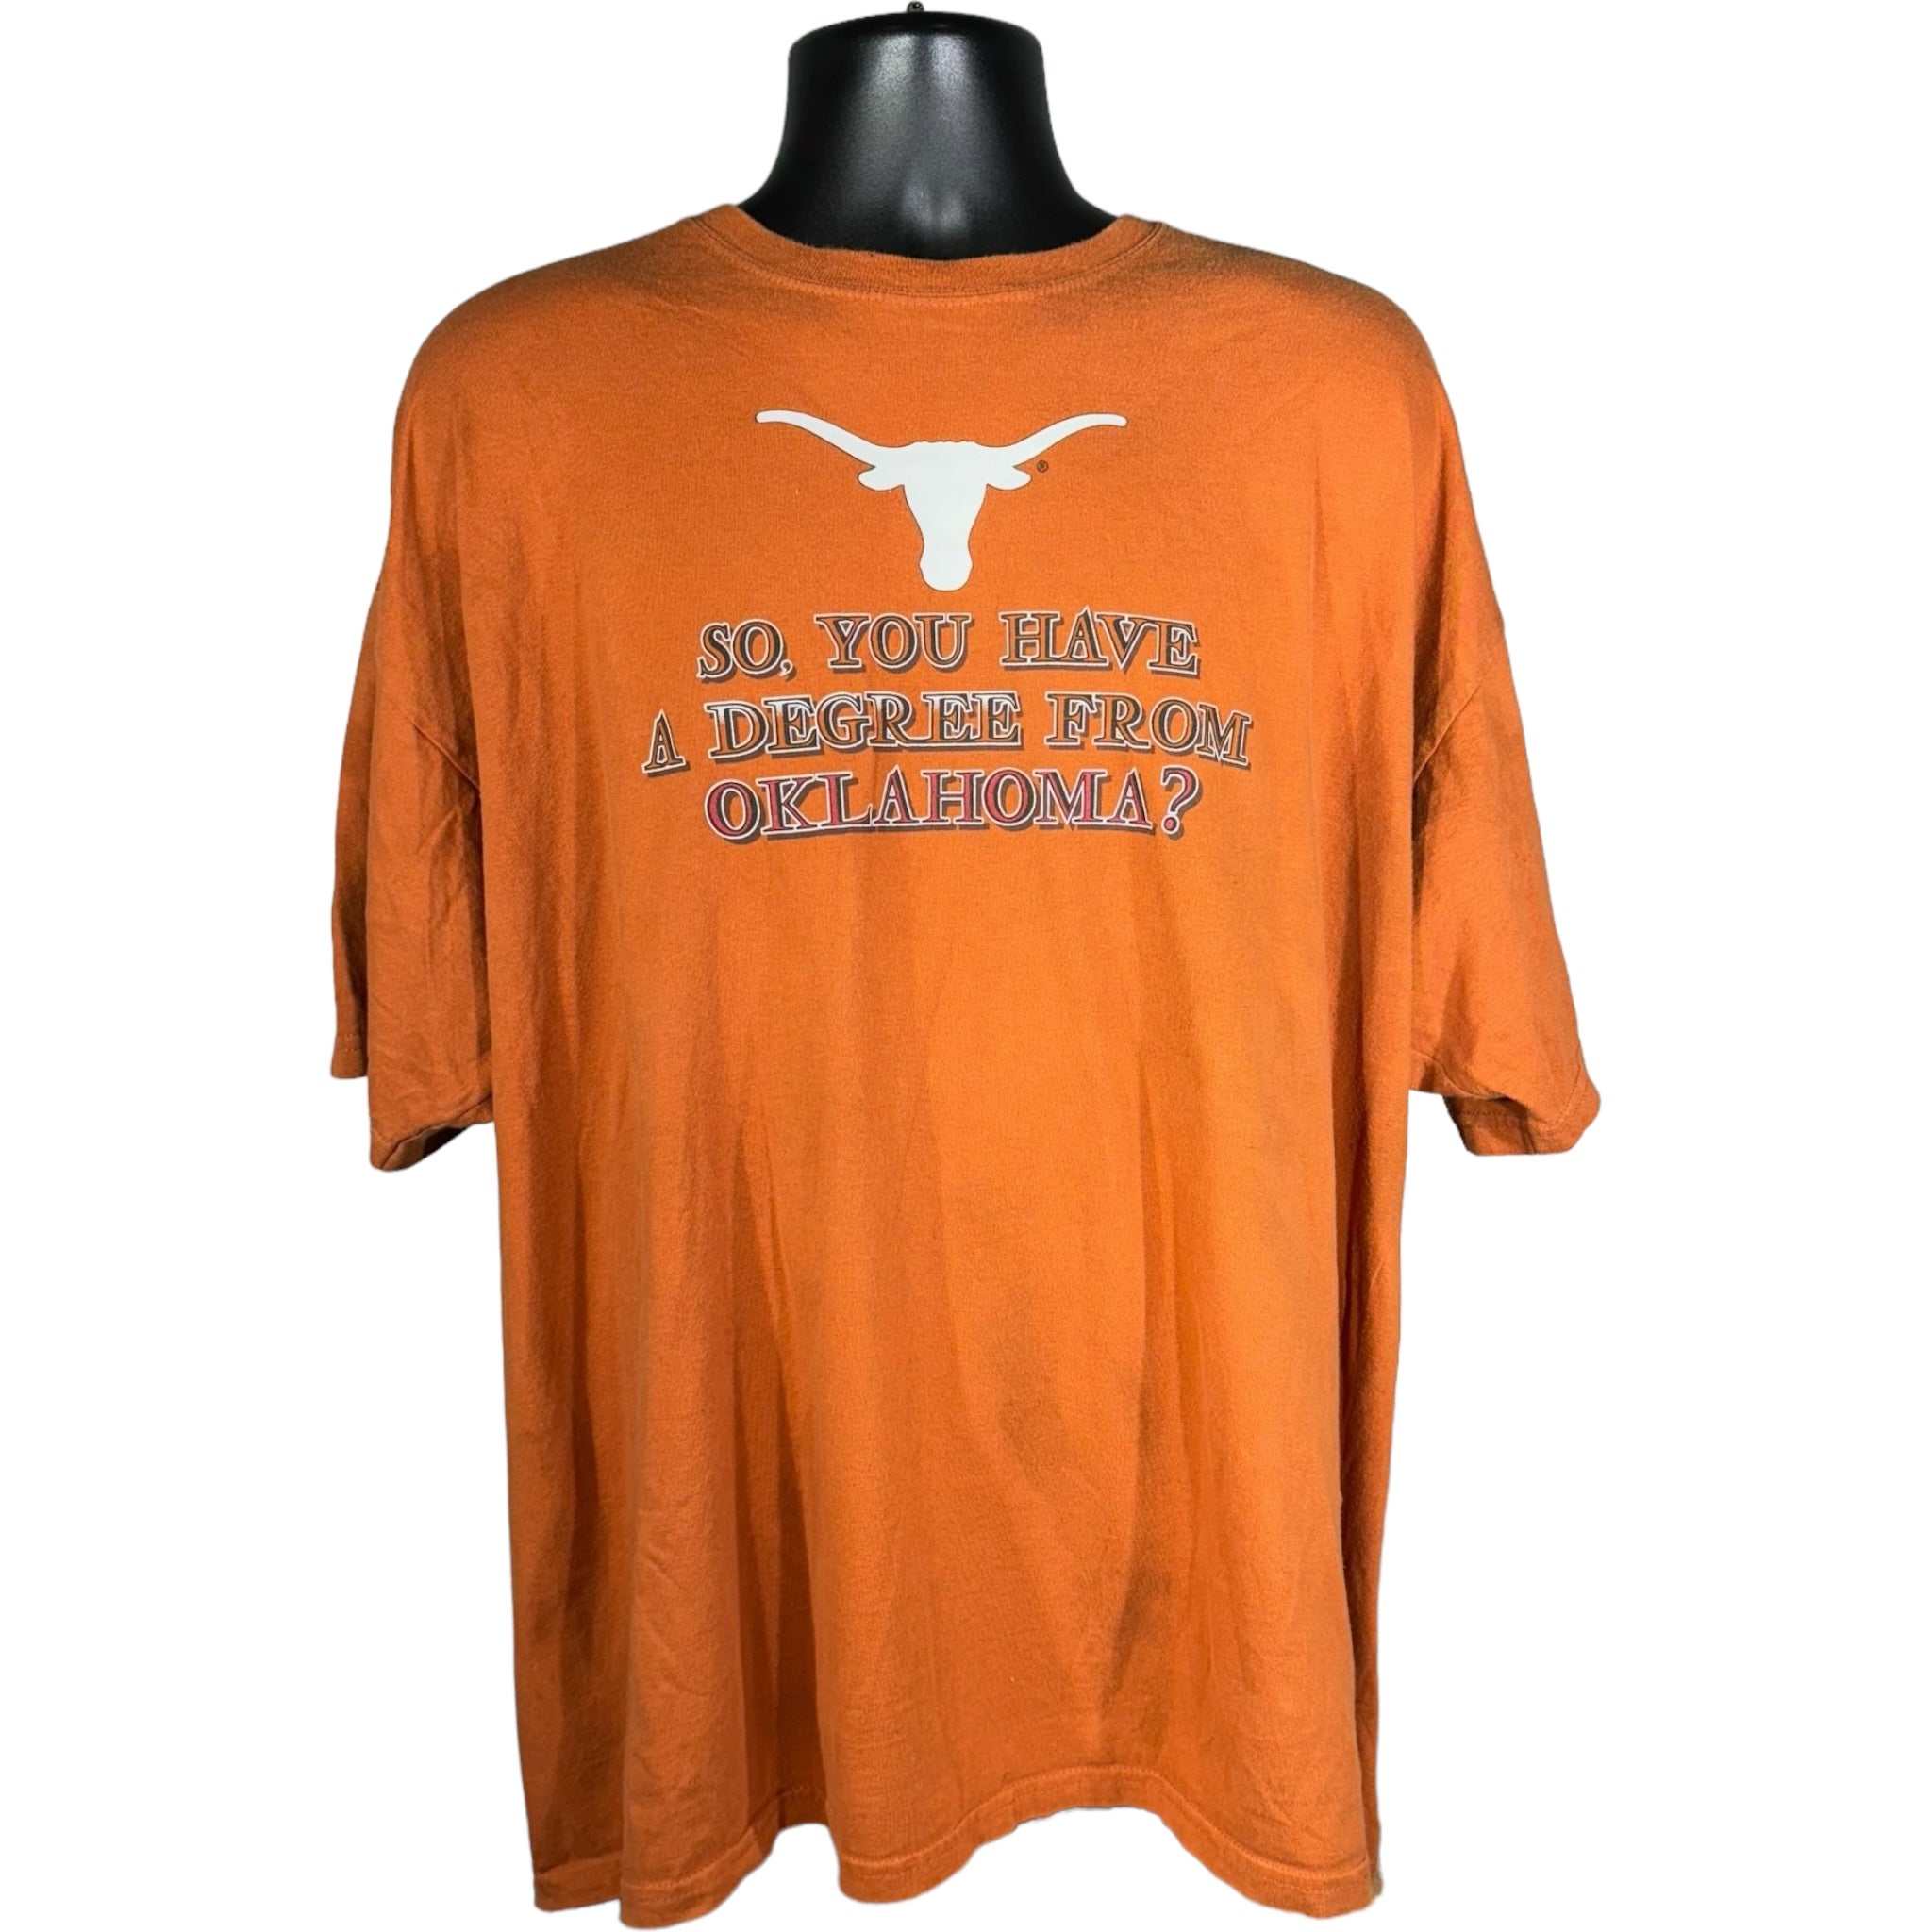 Vintage Texas Longhorns "So, You Have A Degree From Oklahoma?" Tee